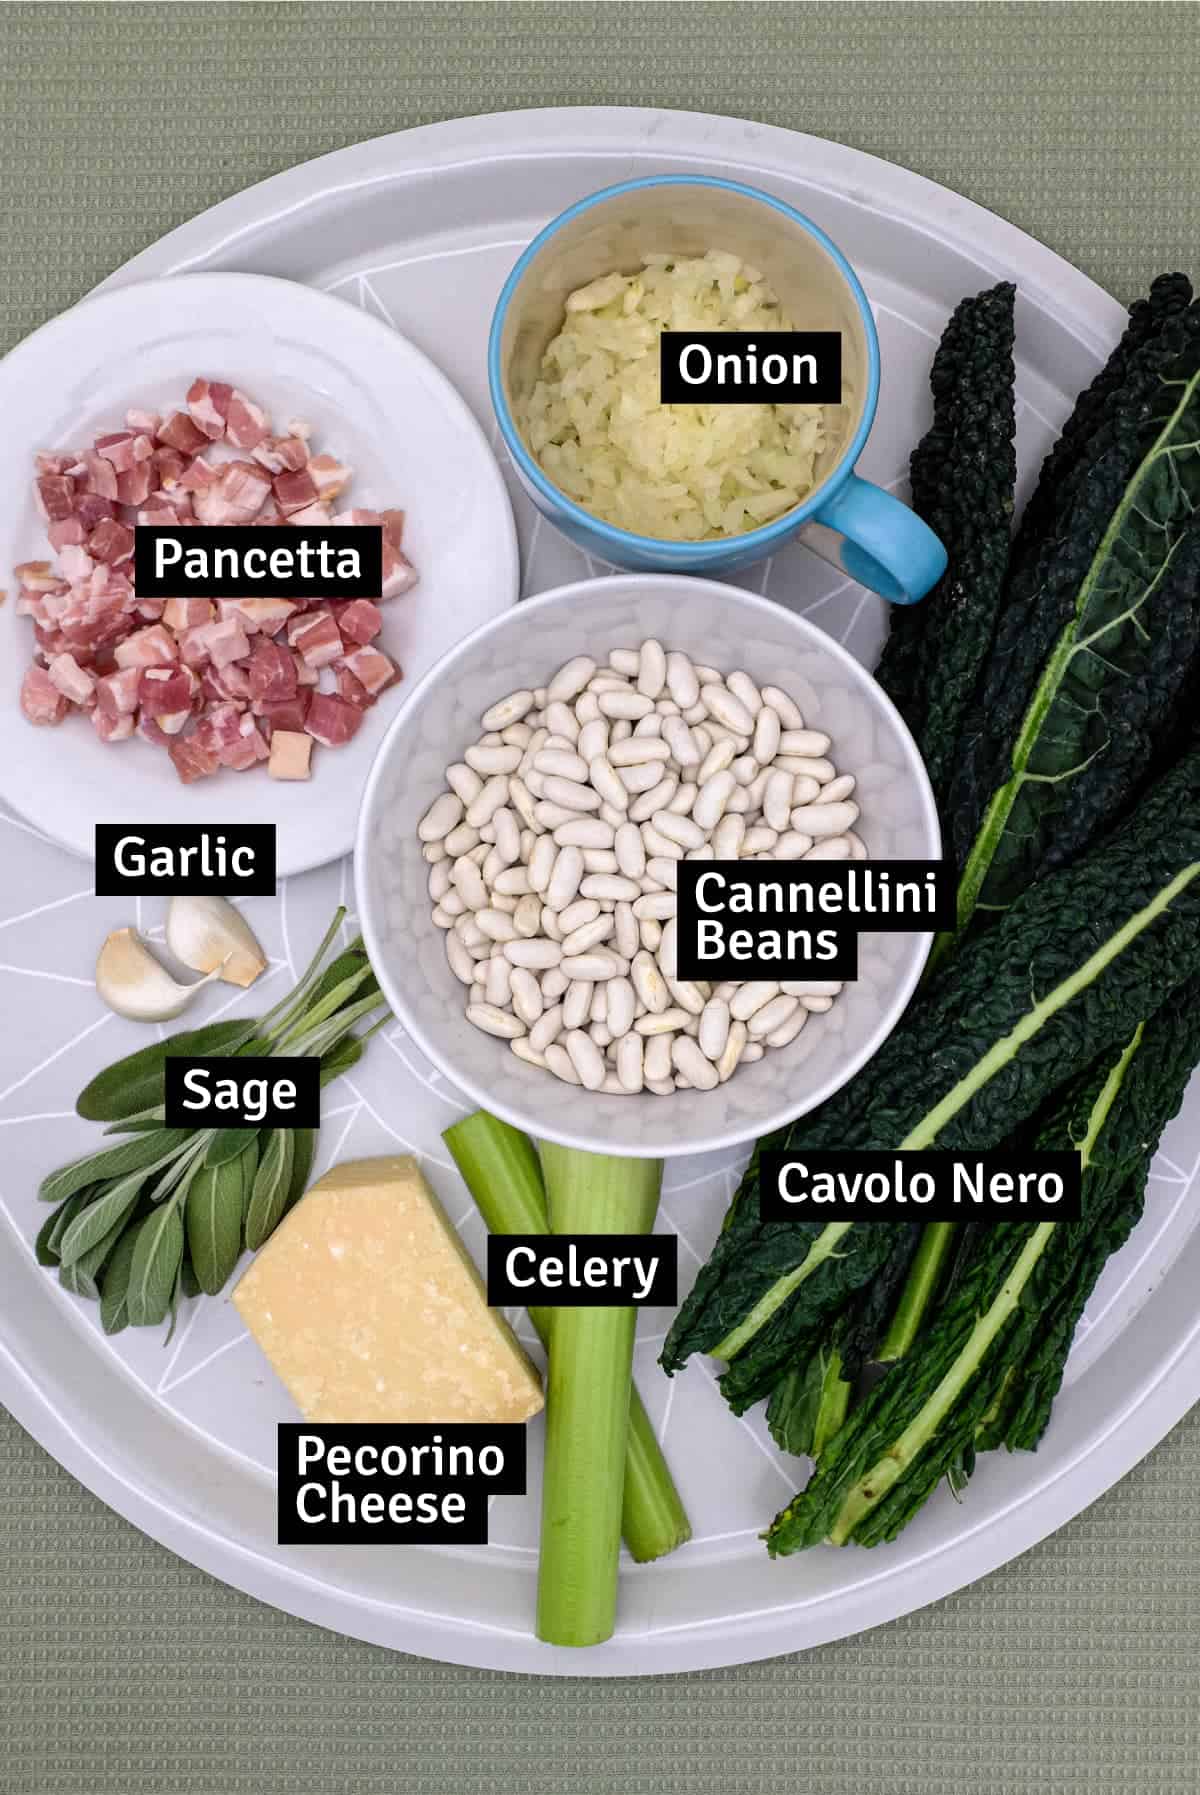 The ingredients for Tuscan Beans with Pancetta and Cavolo Nero.